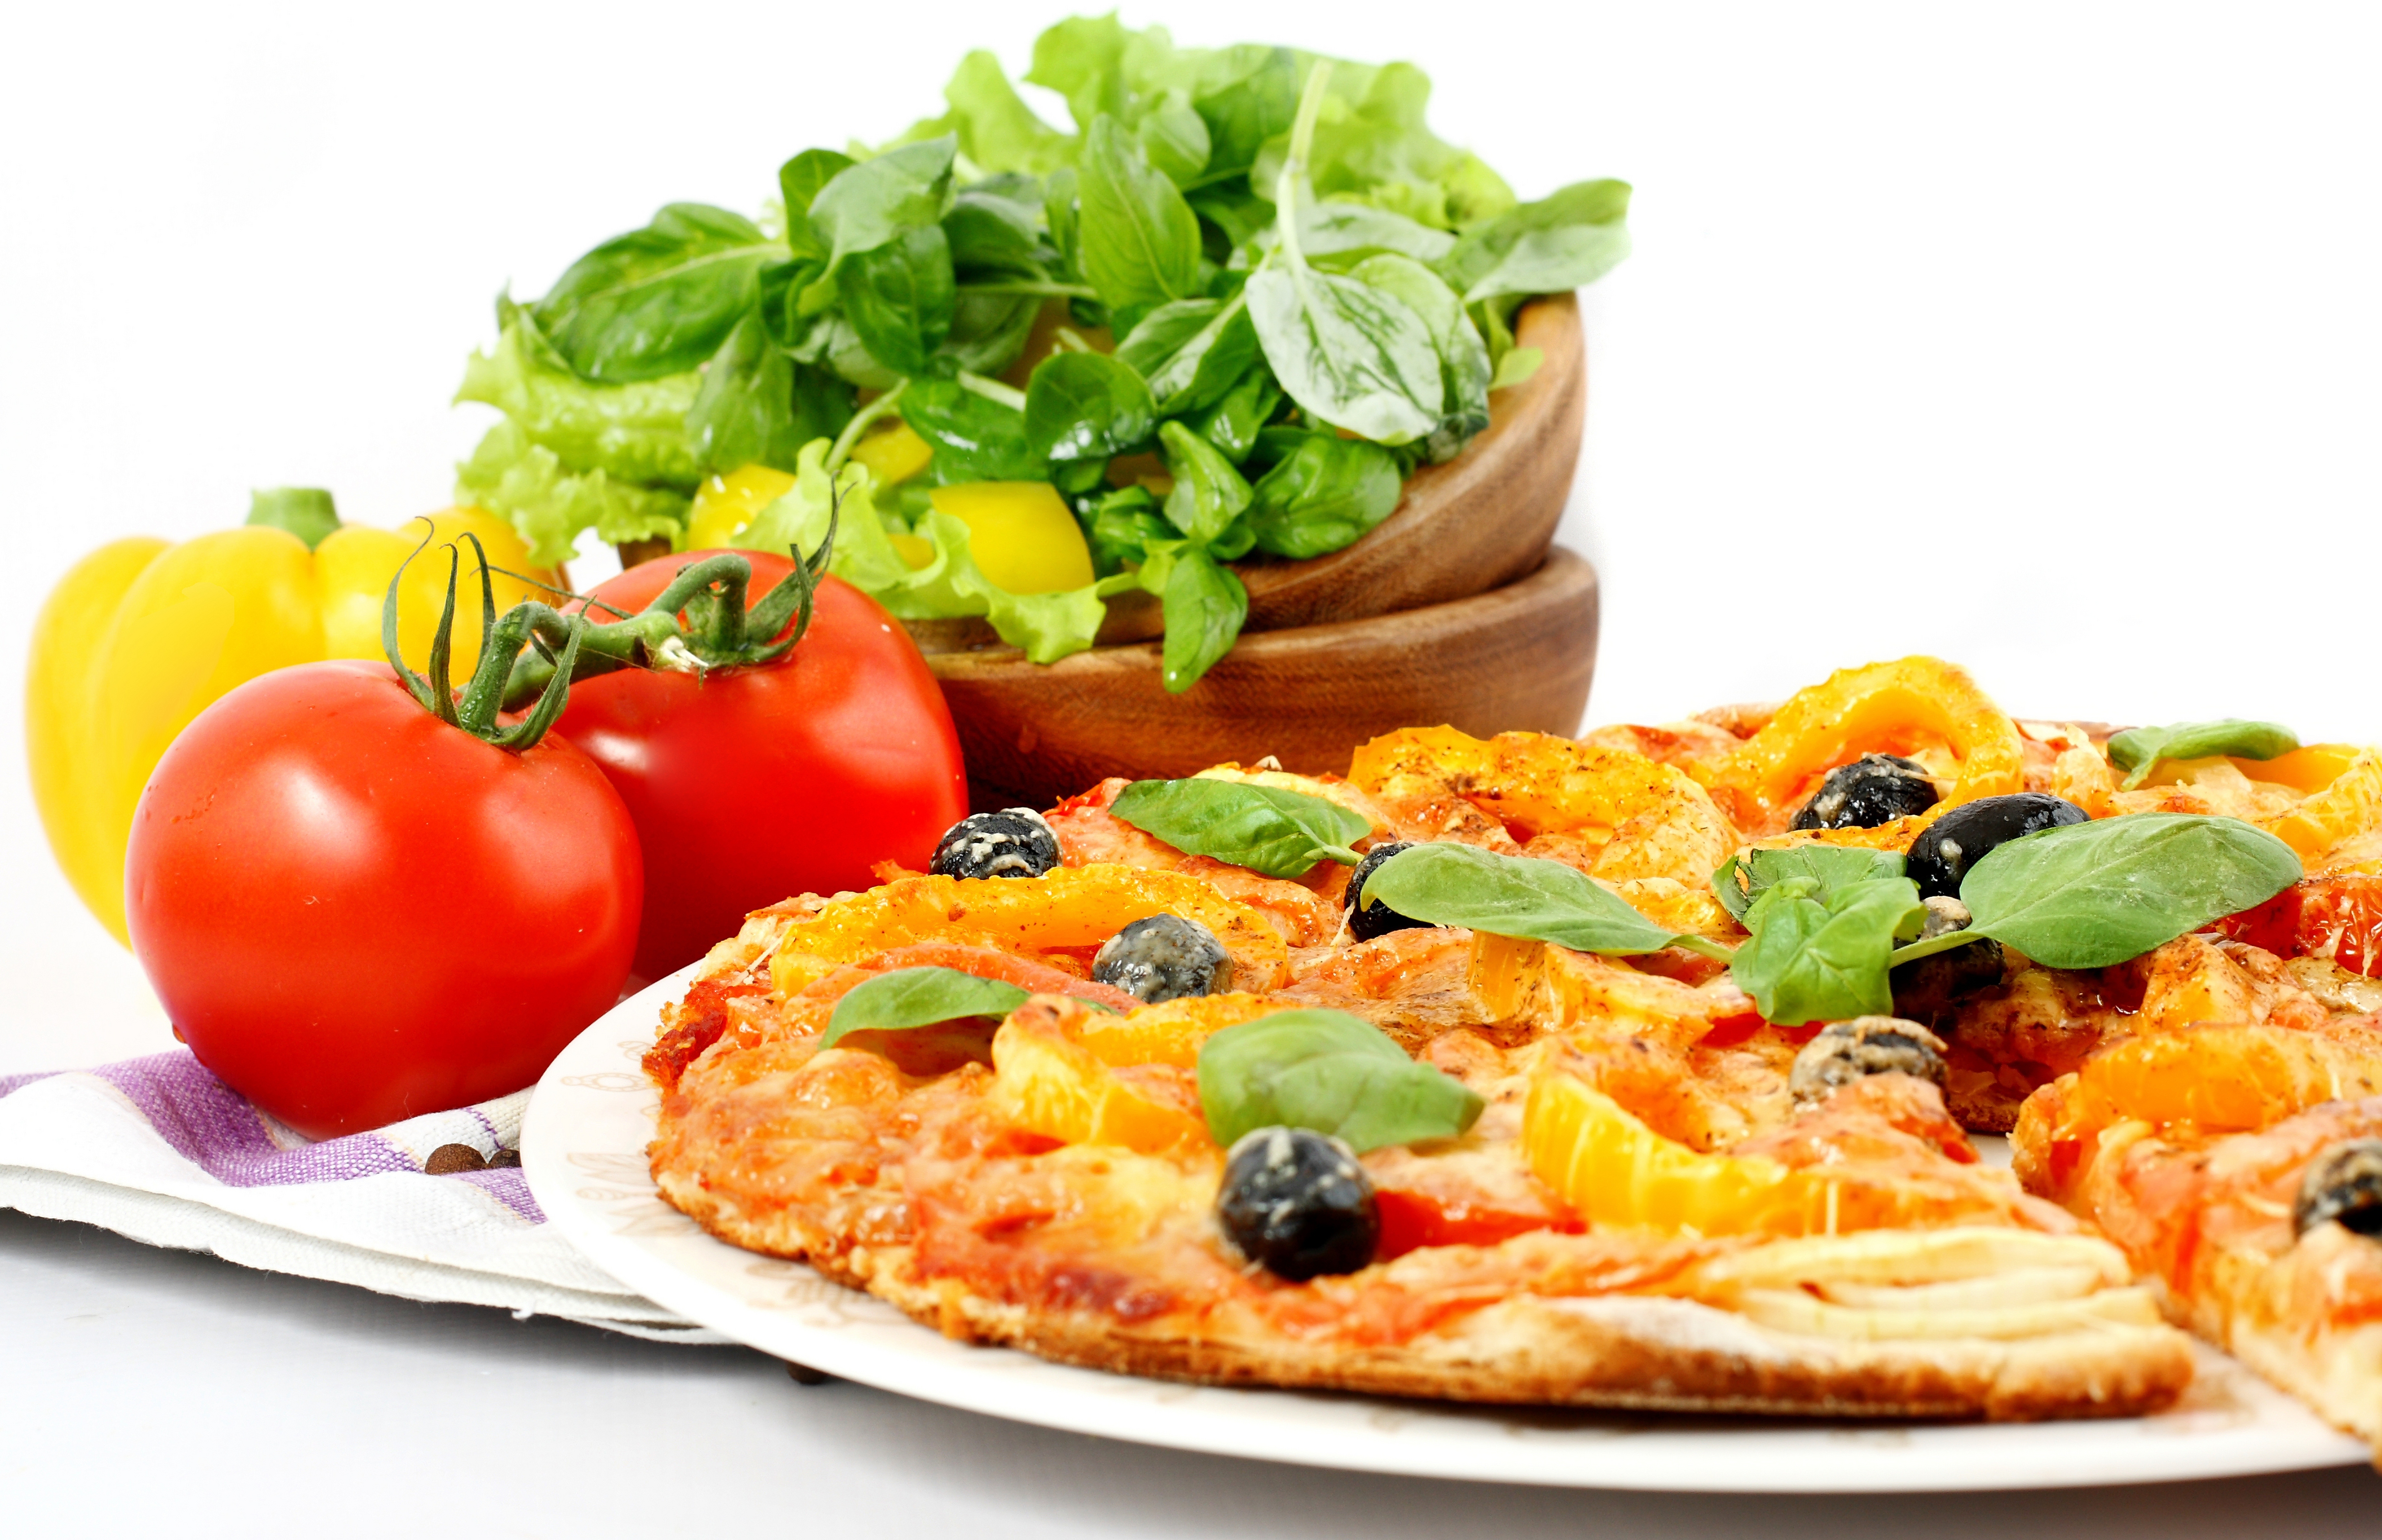 Cheese And Tomato Pizza With Salad - HD Wallpaper 